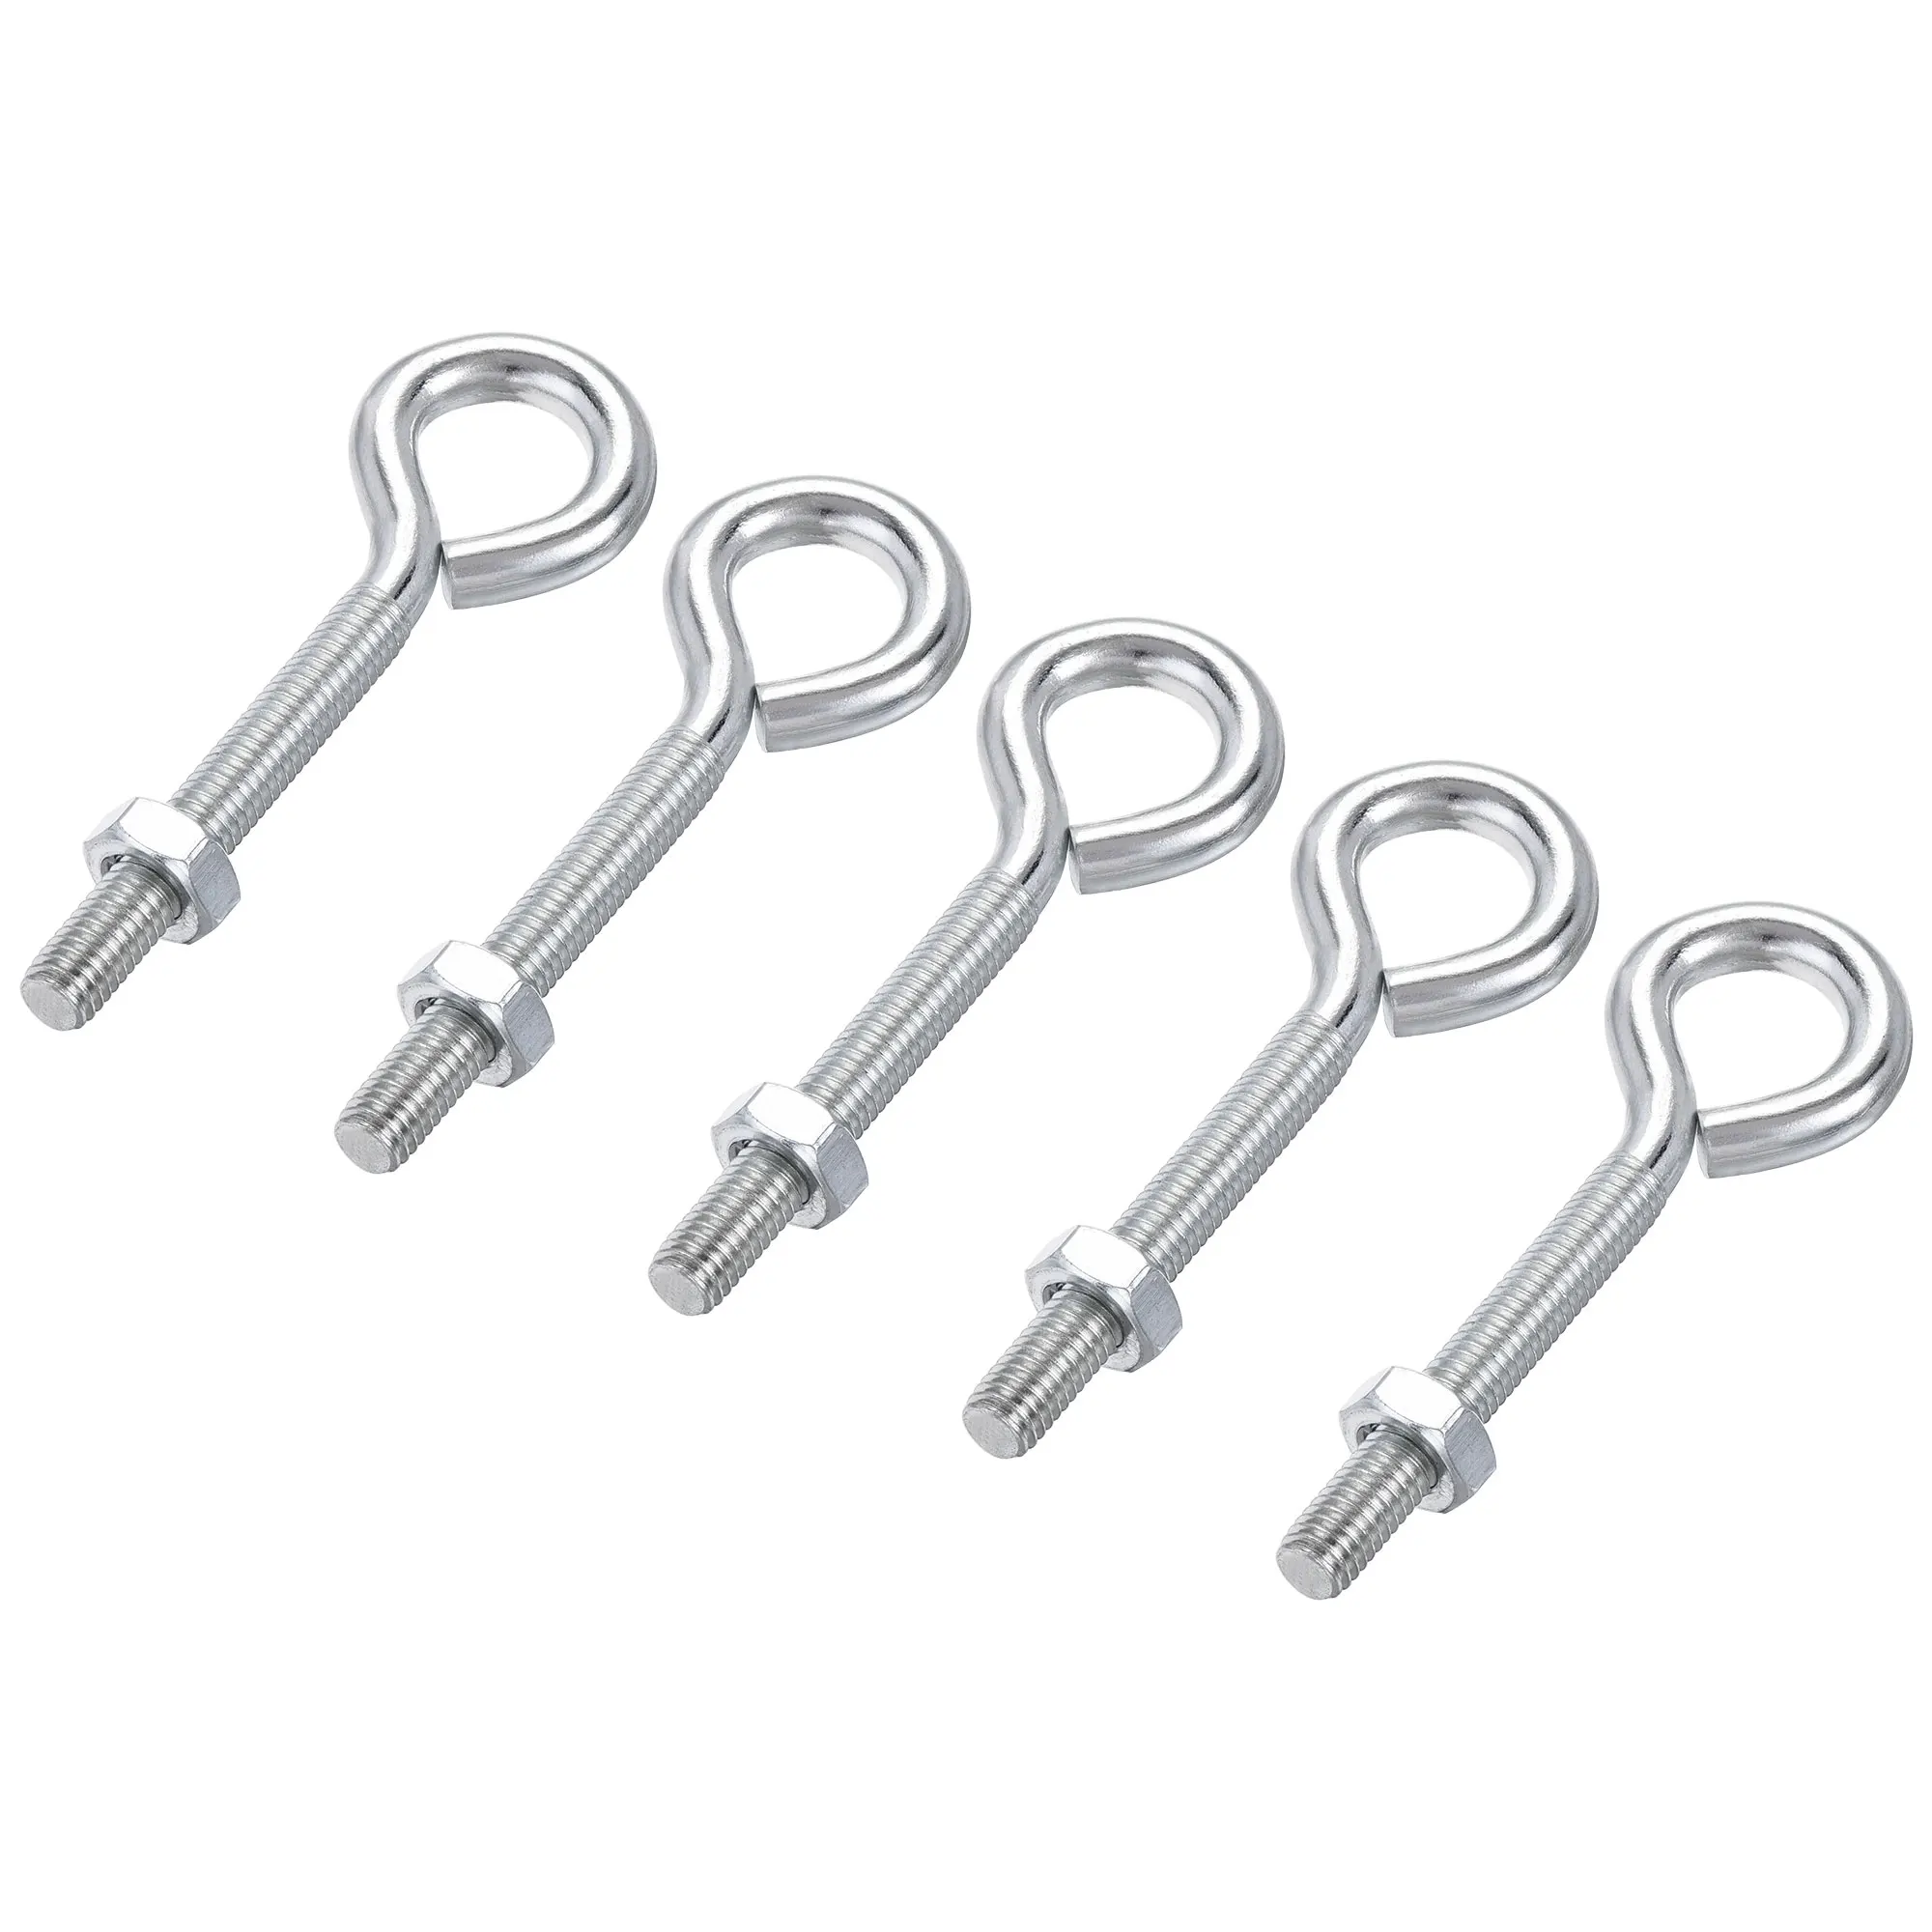 

Uxcell M8x60mm Eye Hooks Screws Bolts Kit, 5pcs Carbon Steel Hanger Eyelet Hooks Screw with Hex Nuts for Metal Hook, Wood